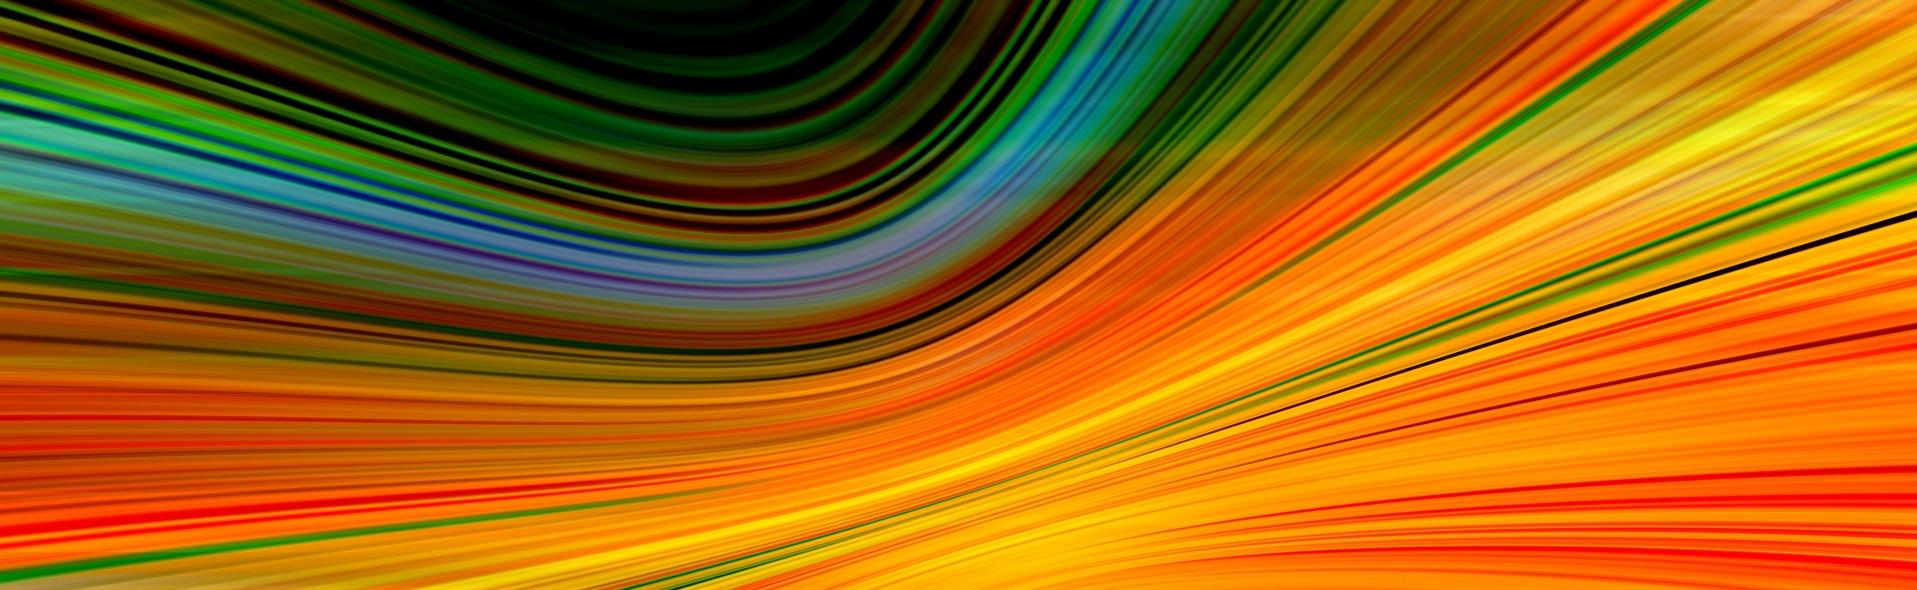 Abstract colorful graphic